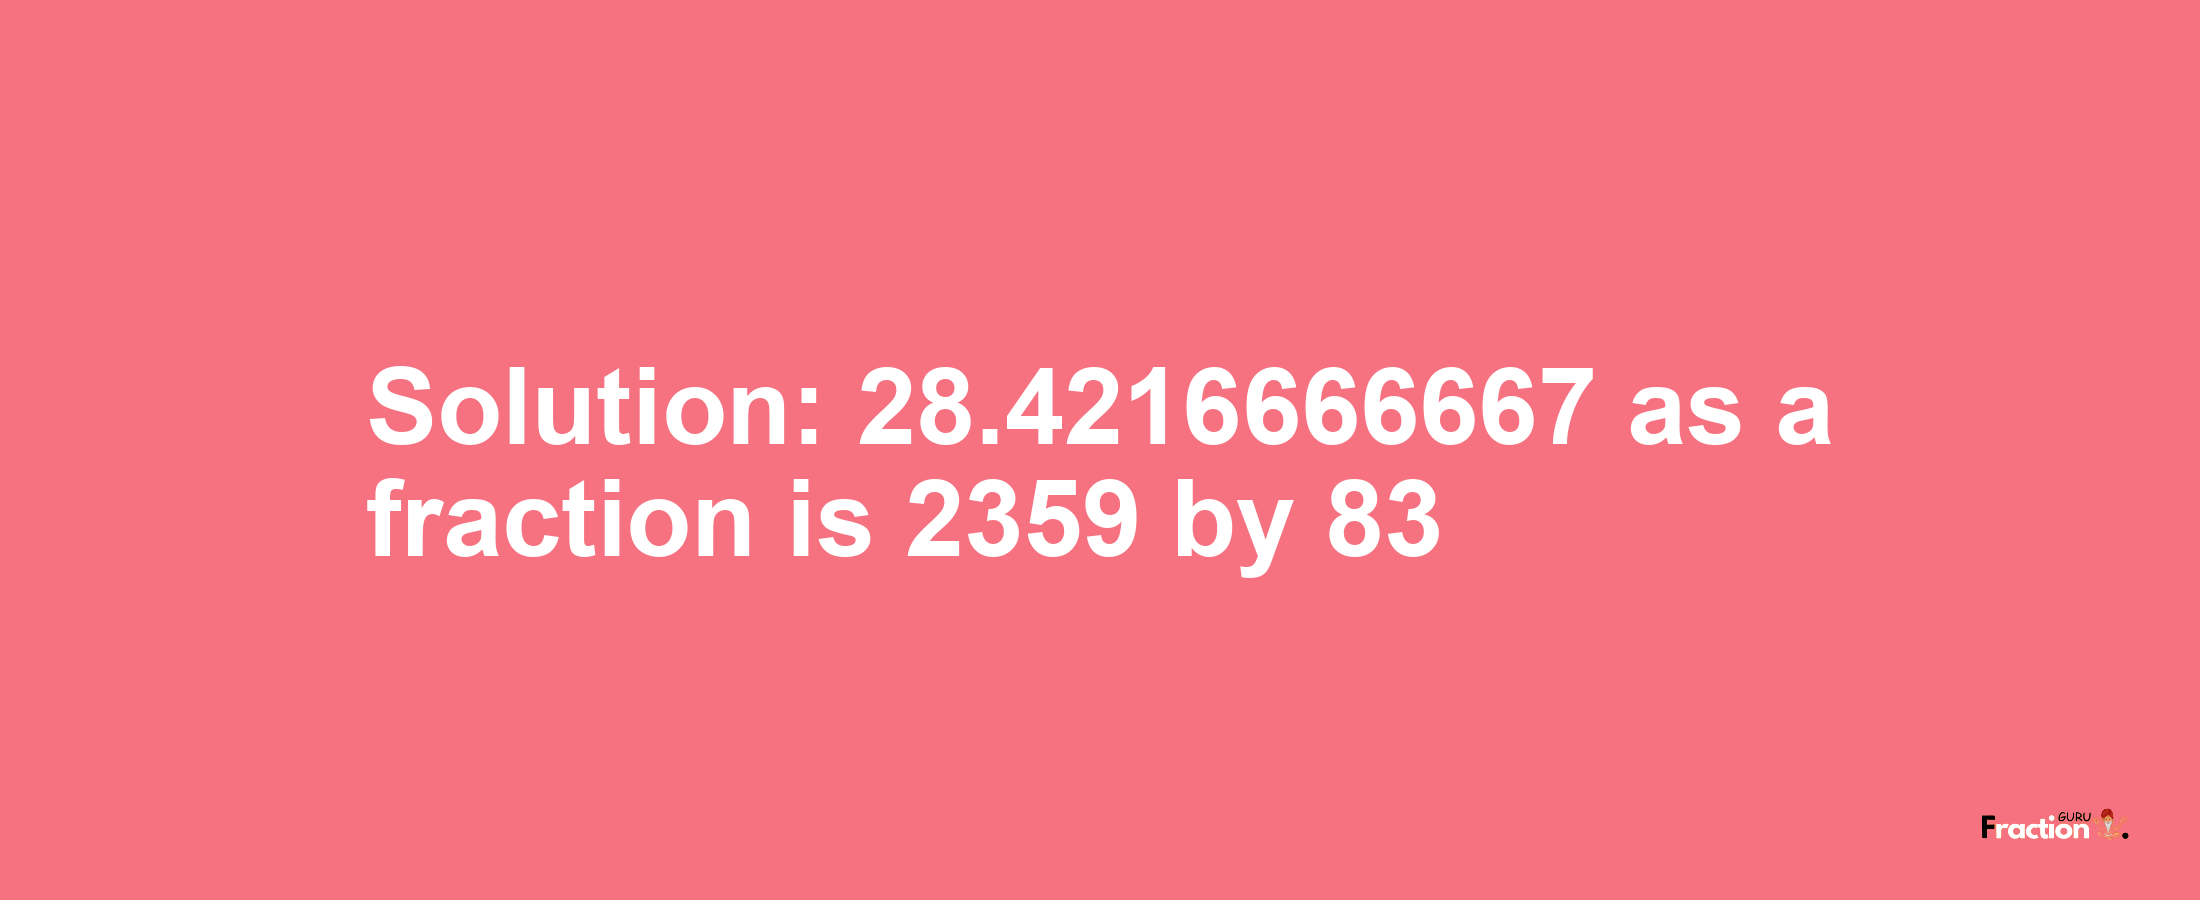 Solution:28.4216666667 as a fraction is 2359/83